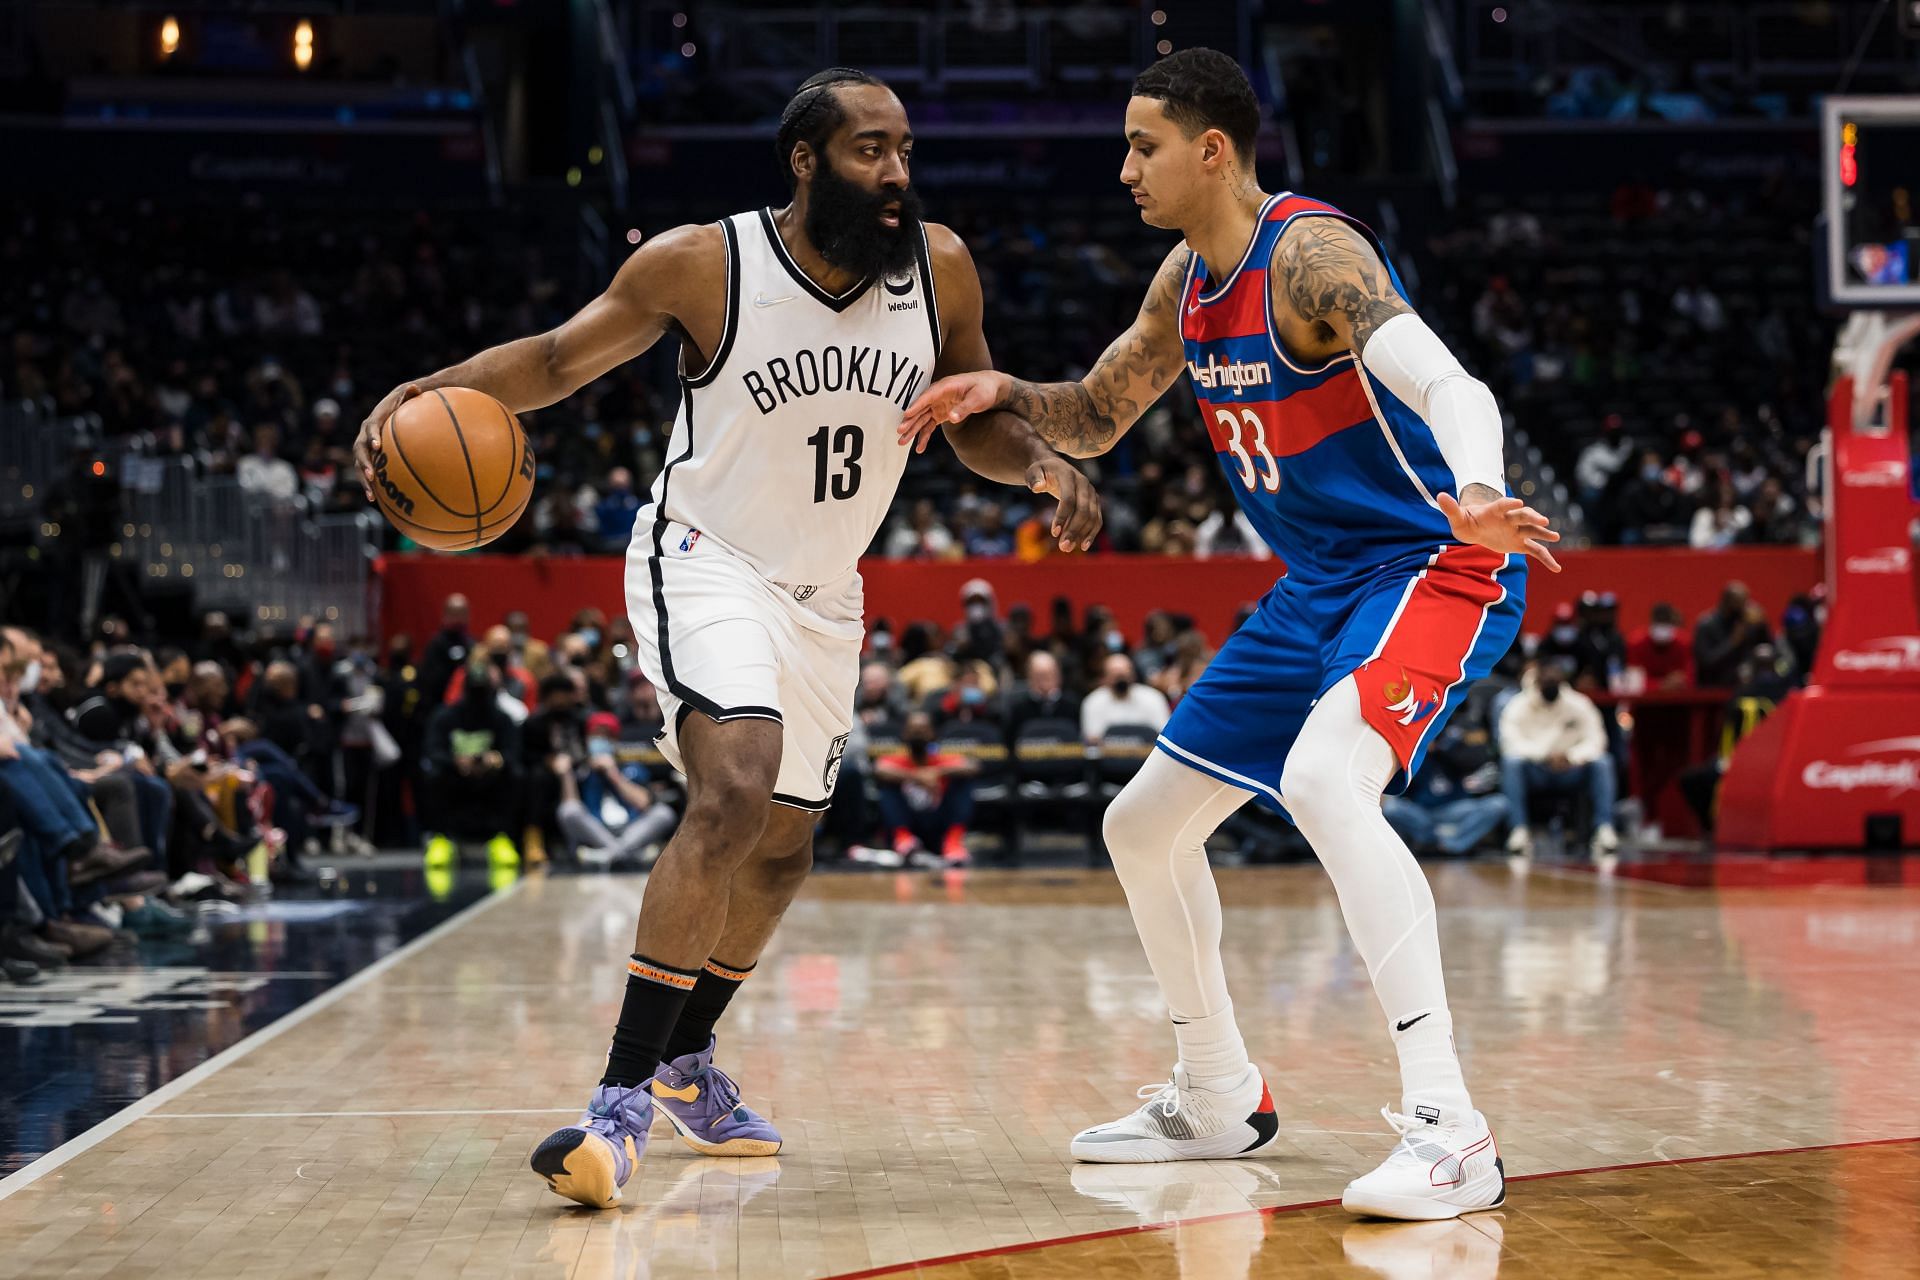 James Harden of the Brooklyn Nets handles the ball against Kyle Kuzma of the Washington Wizards.